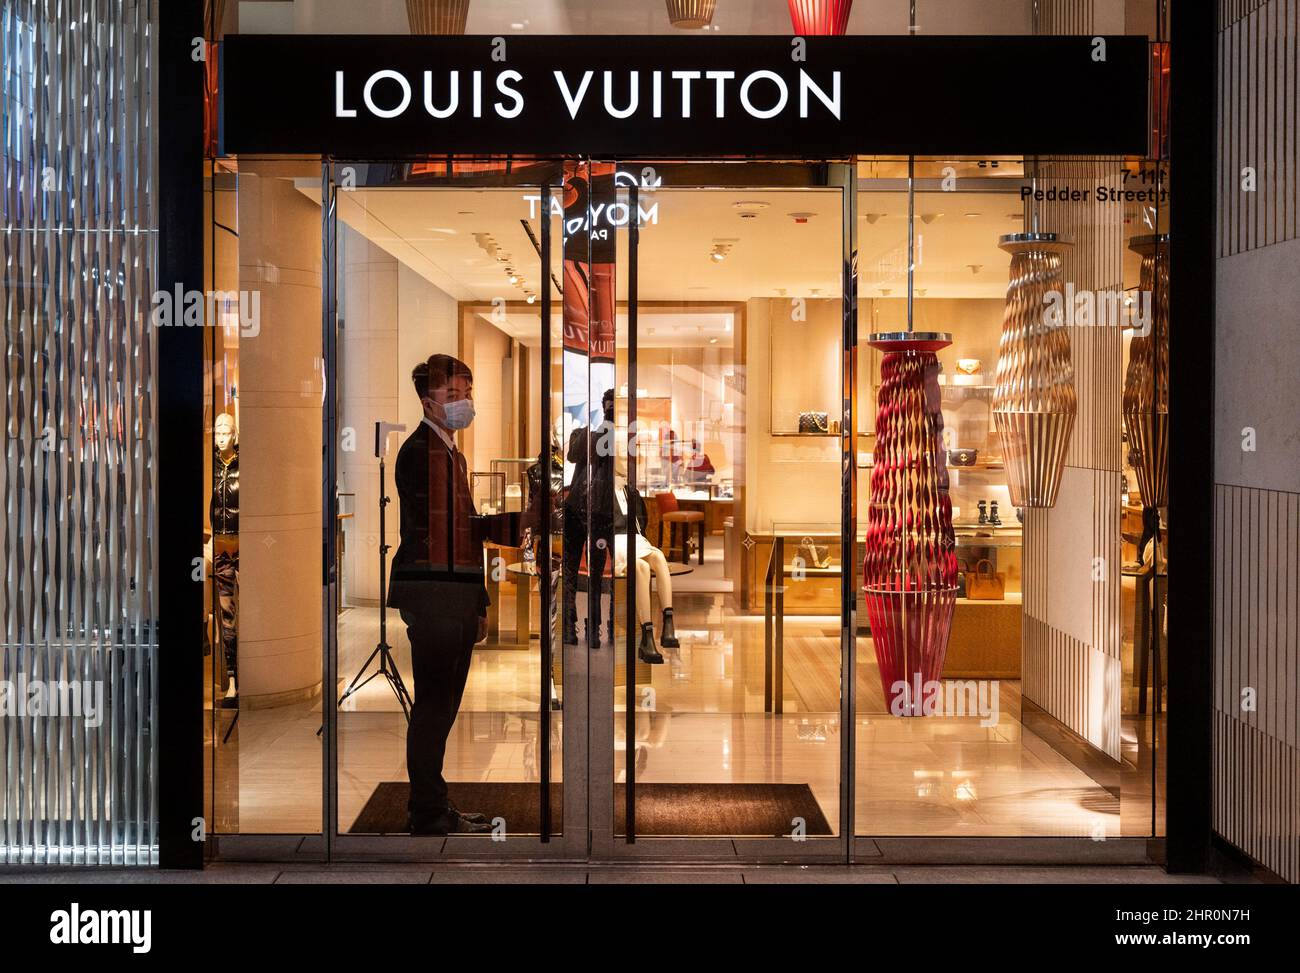 Luxury Retail Store Hong Kong Airport Editorial Photo - Image of  collection, logo: 273464746